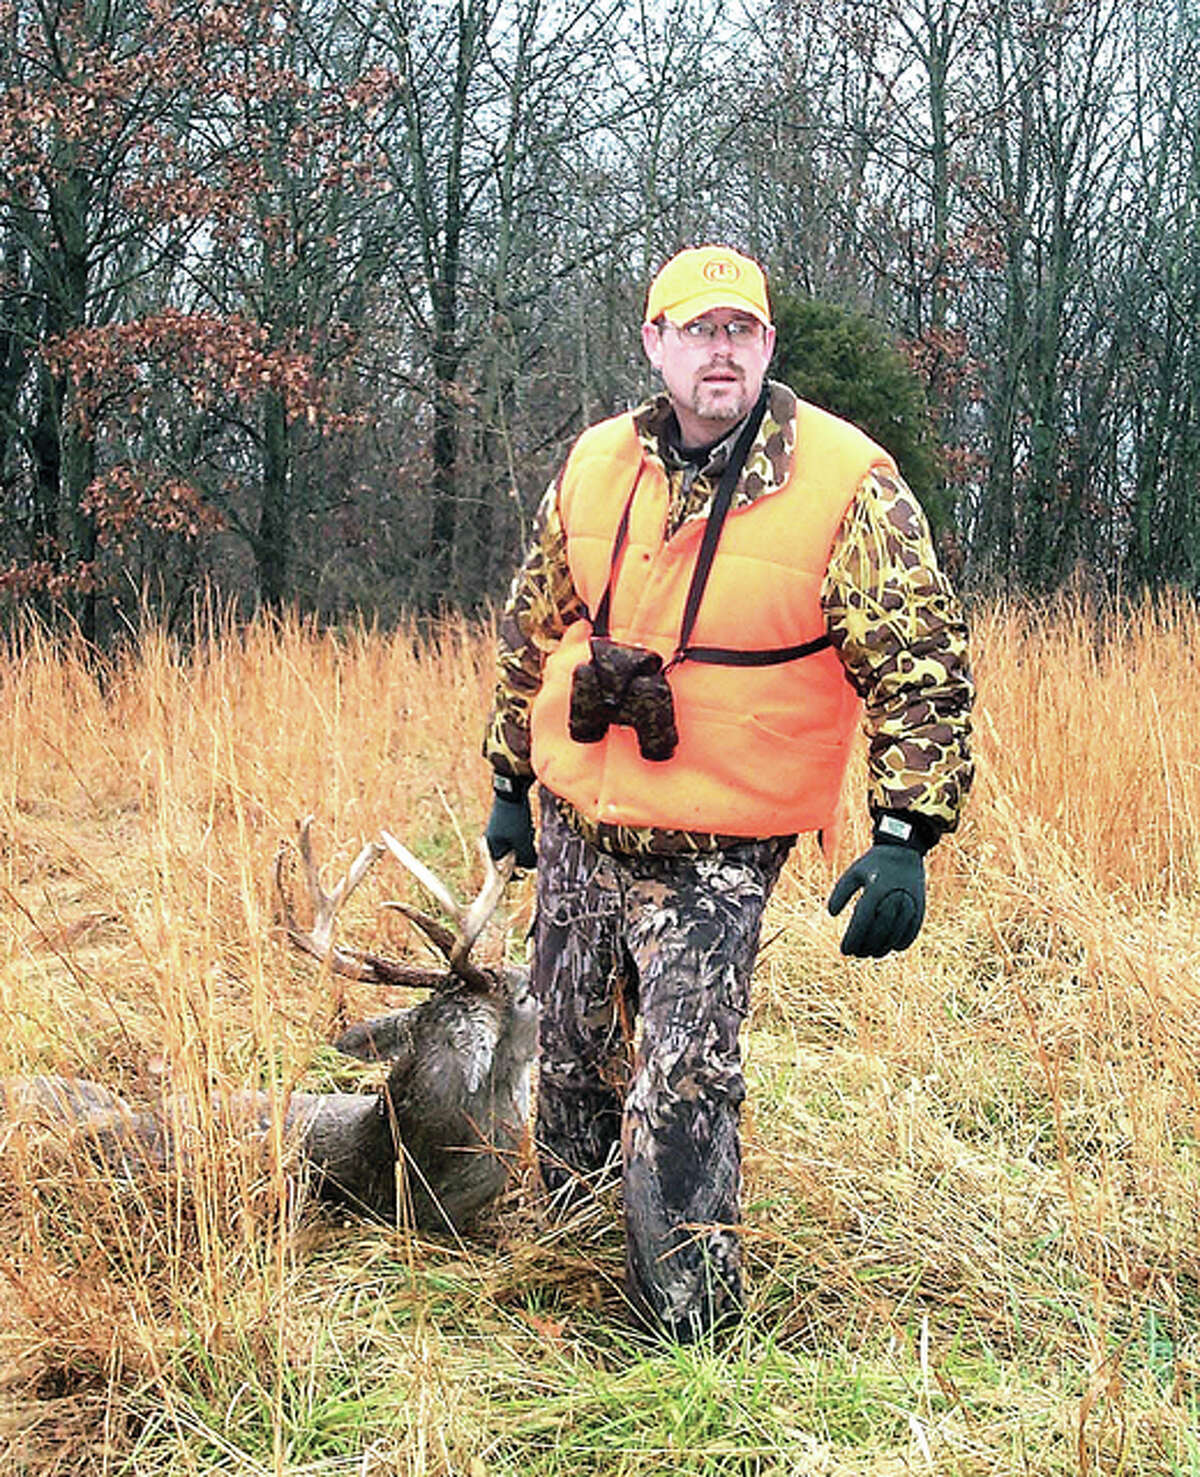 Though more hunters bagged deer during the 2015/16 seasons, the overall total remains disappointing to most deer enthusiasts.